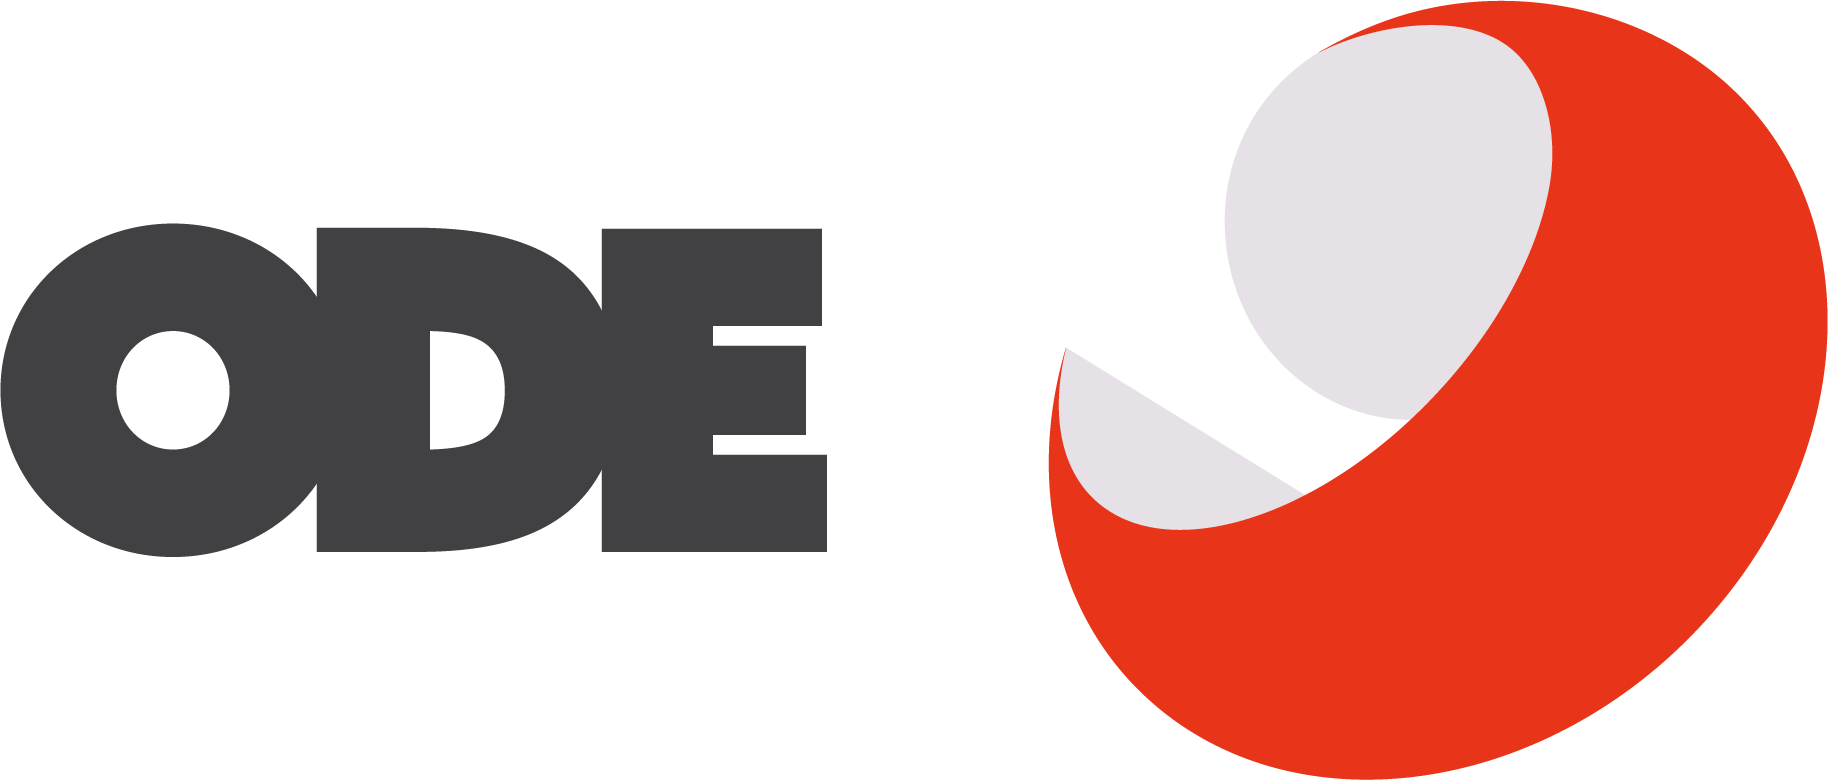 Ode logo row red